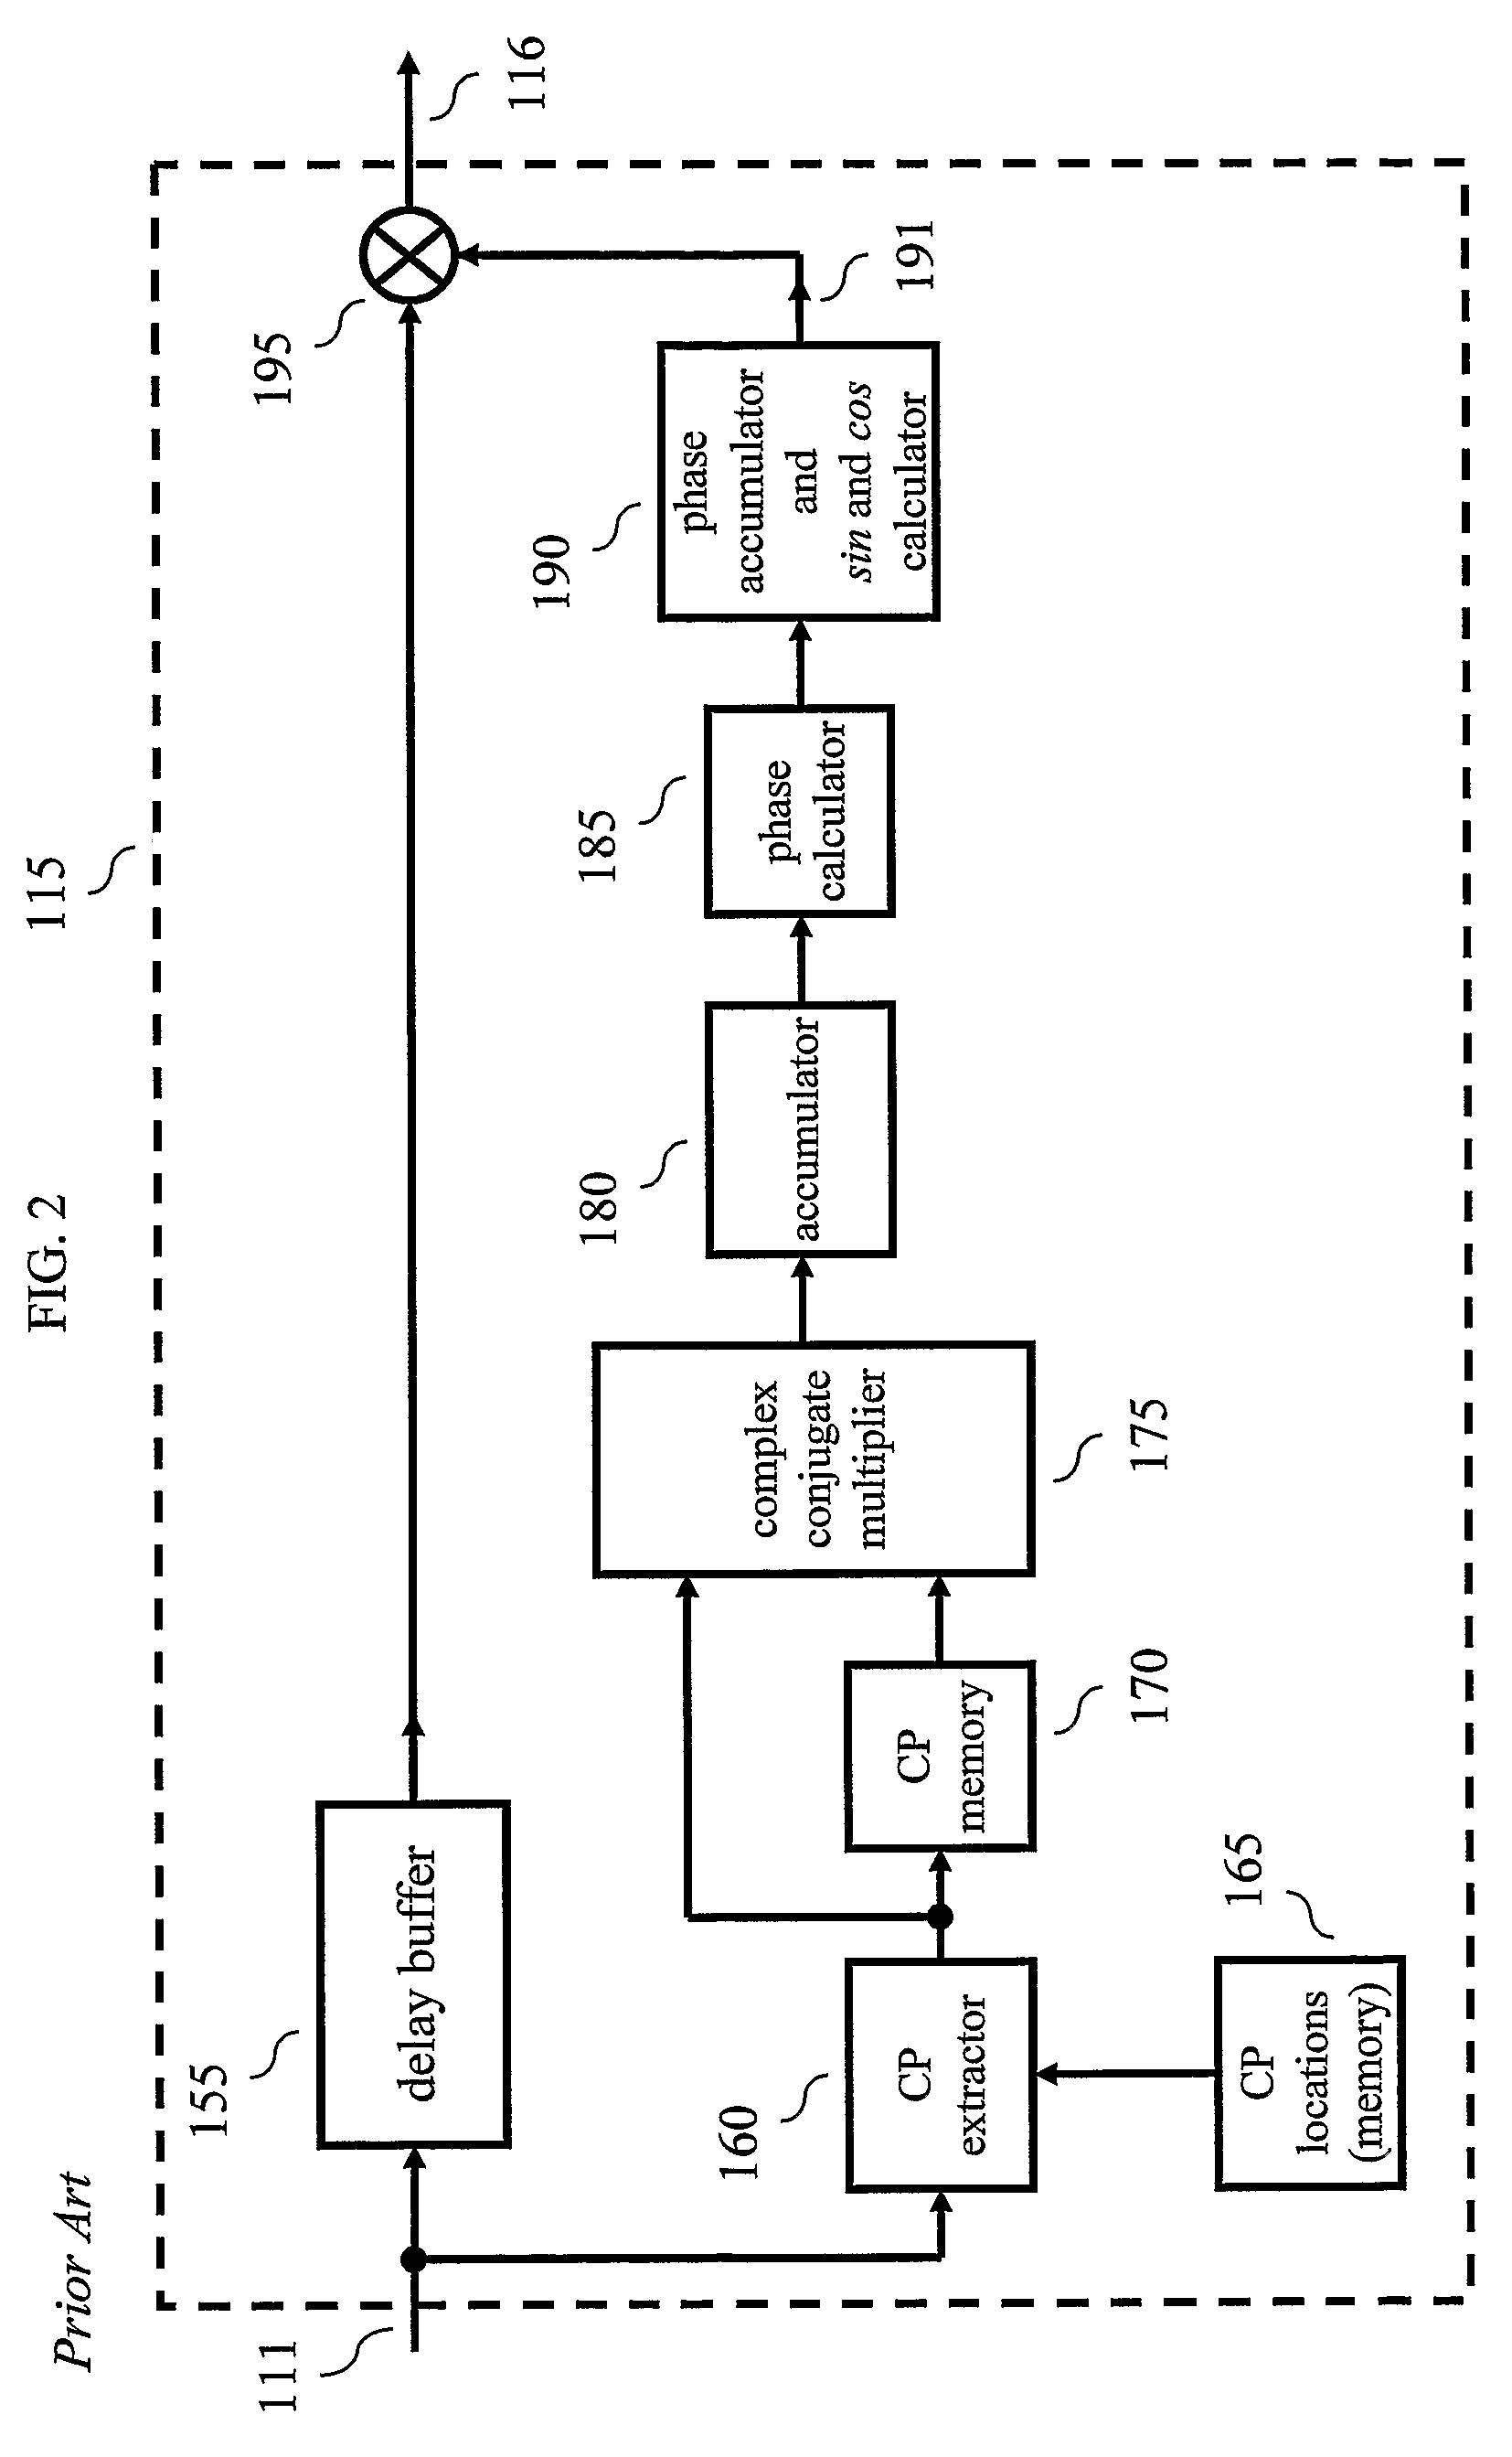 Apparatus and method for removing common phase error in a DVB-T/H receiver